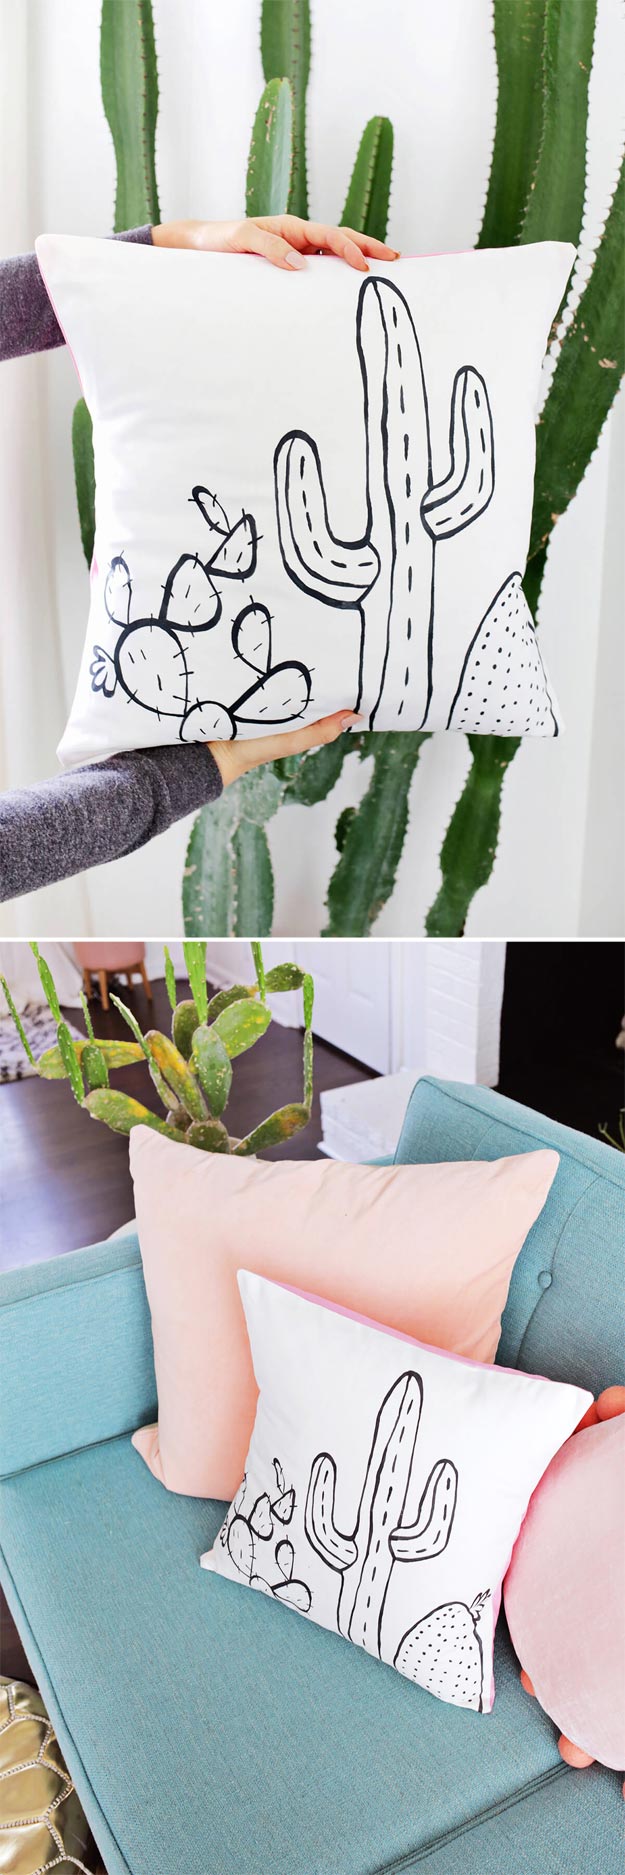 Easy Cactus Craft - DIY Cactus Outline Pillow - Homemade Cactus Party Idea - Cactus Craft for Room - Crafts to do With Kids - Cute and Easy Crafts - Quick Crafts to Make at Home #diycrafts #makeandsell #cactusdecor